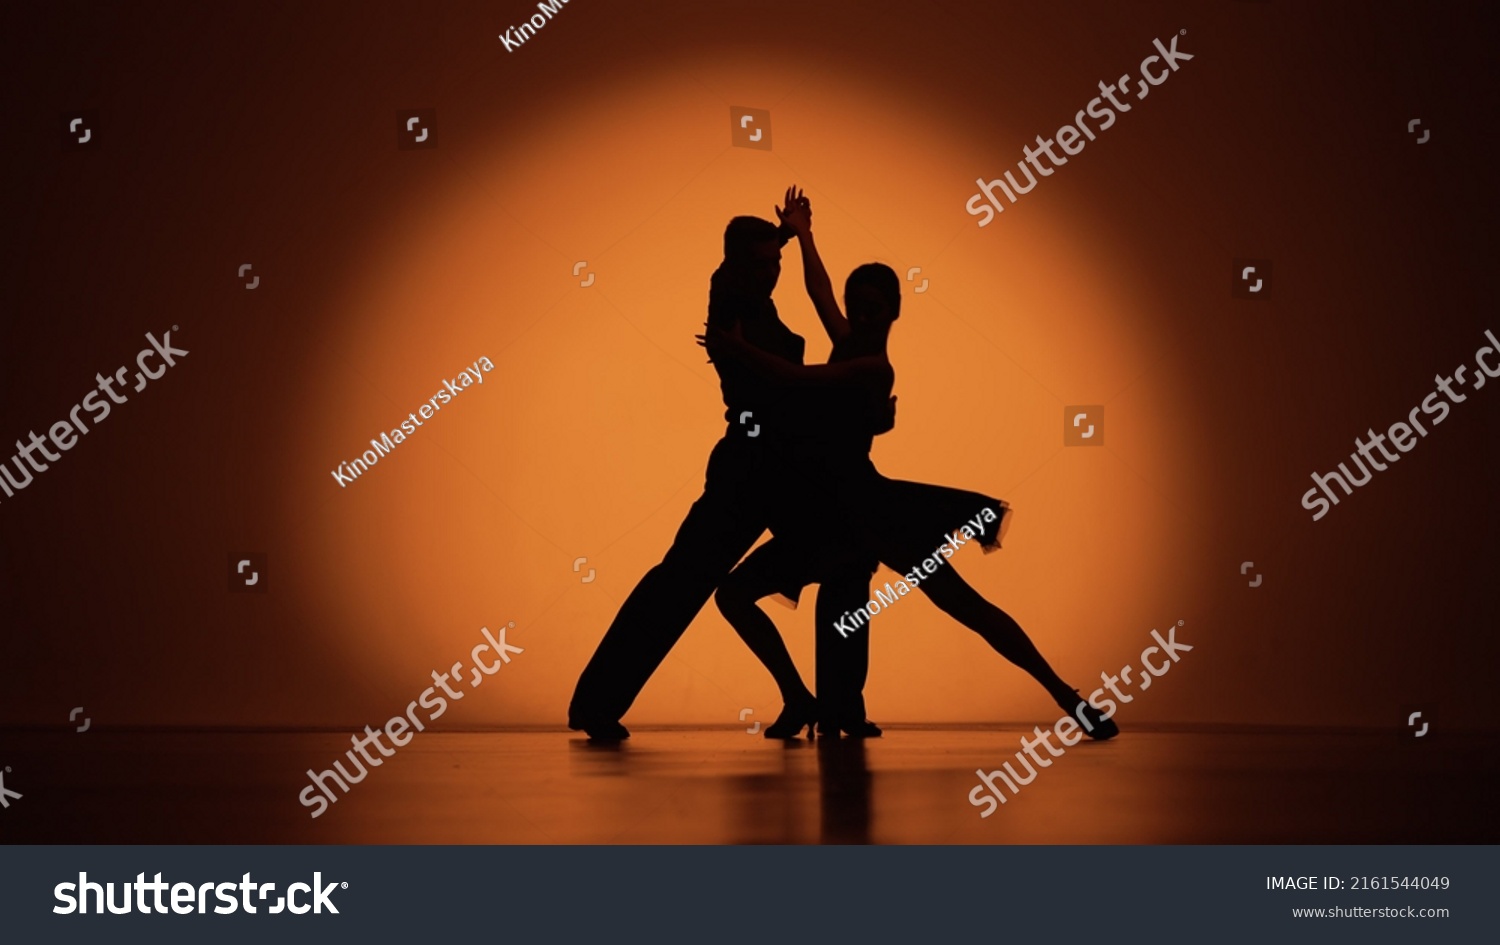 Couple of dancers approach each other and begin to dance Argentine tango. Elements of latin ballroom dance in studio with orange brown background. Dark silhouettes. Slow motion ready, 4K at 59.94fps. #2161544049